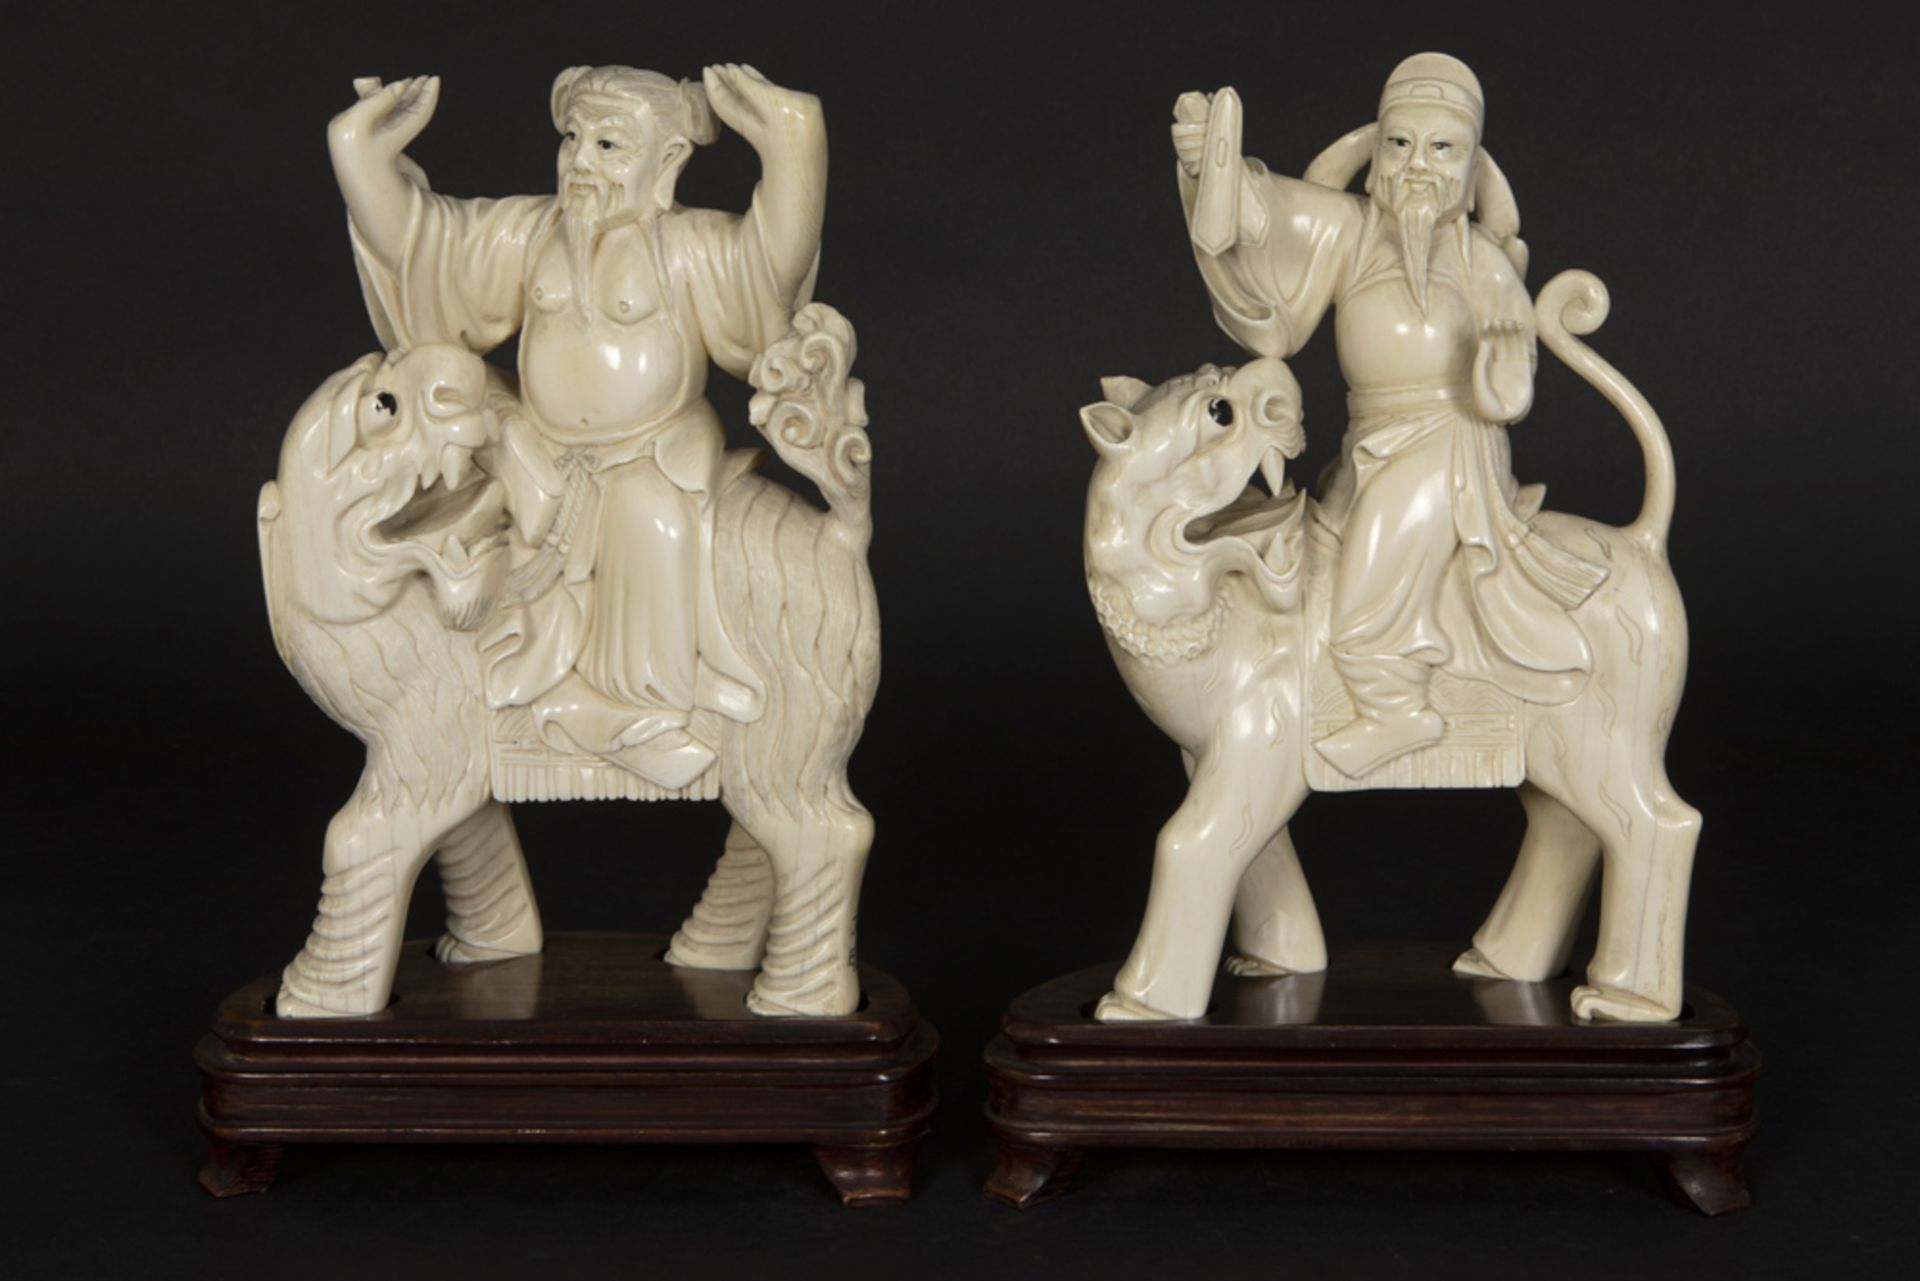 pair of antique Chinese late Qing period sculptures in finely carved ivory with a nice patina and